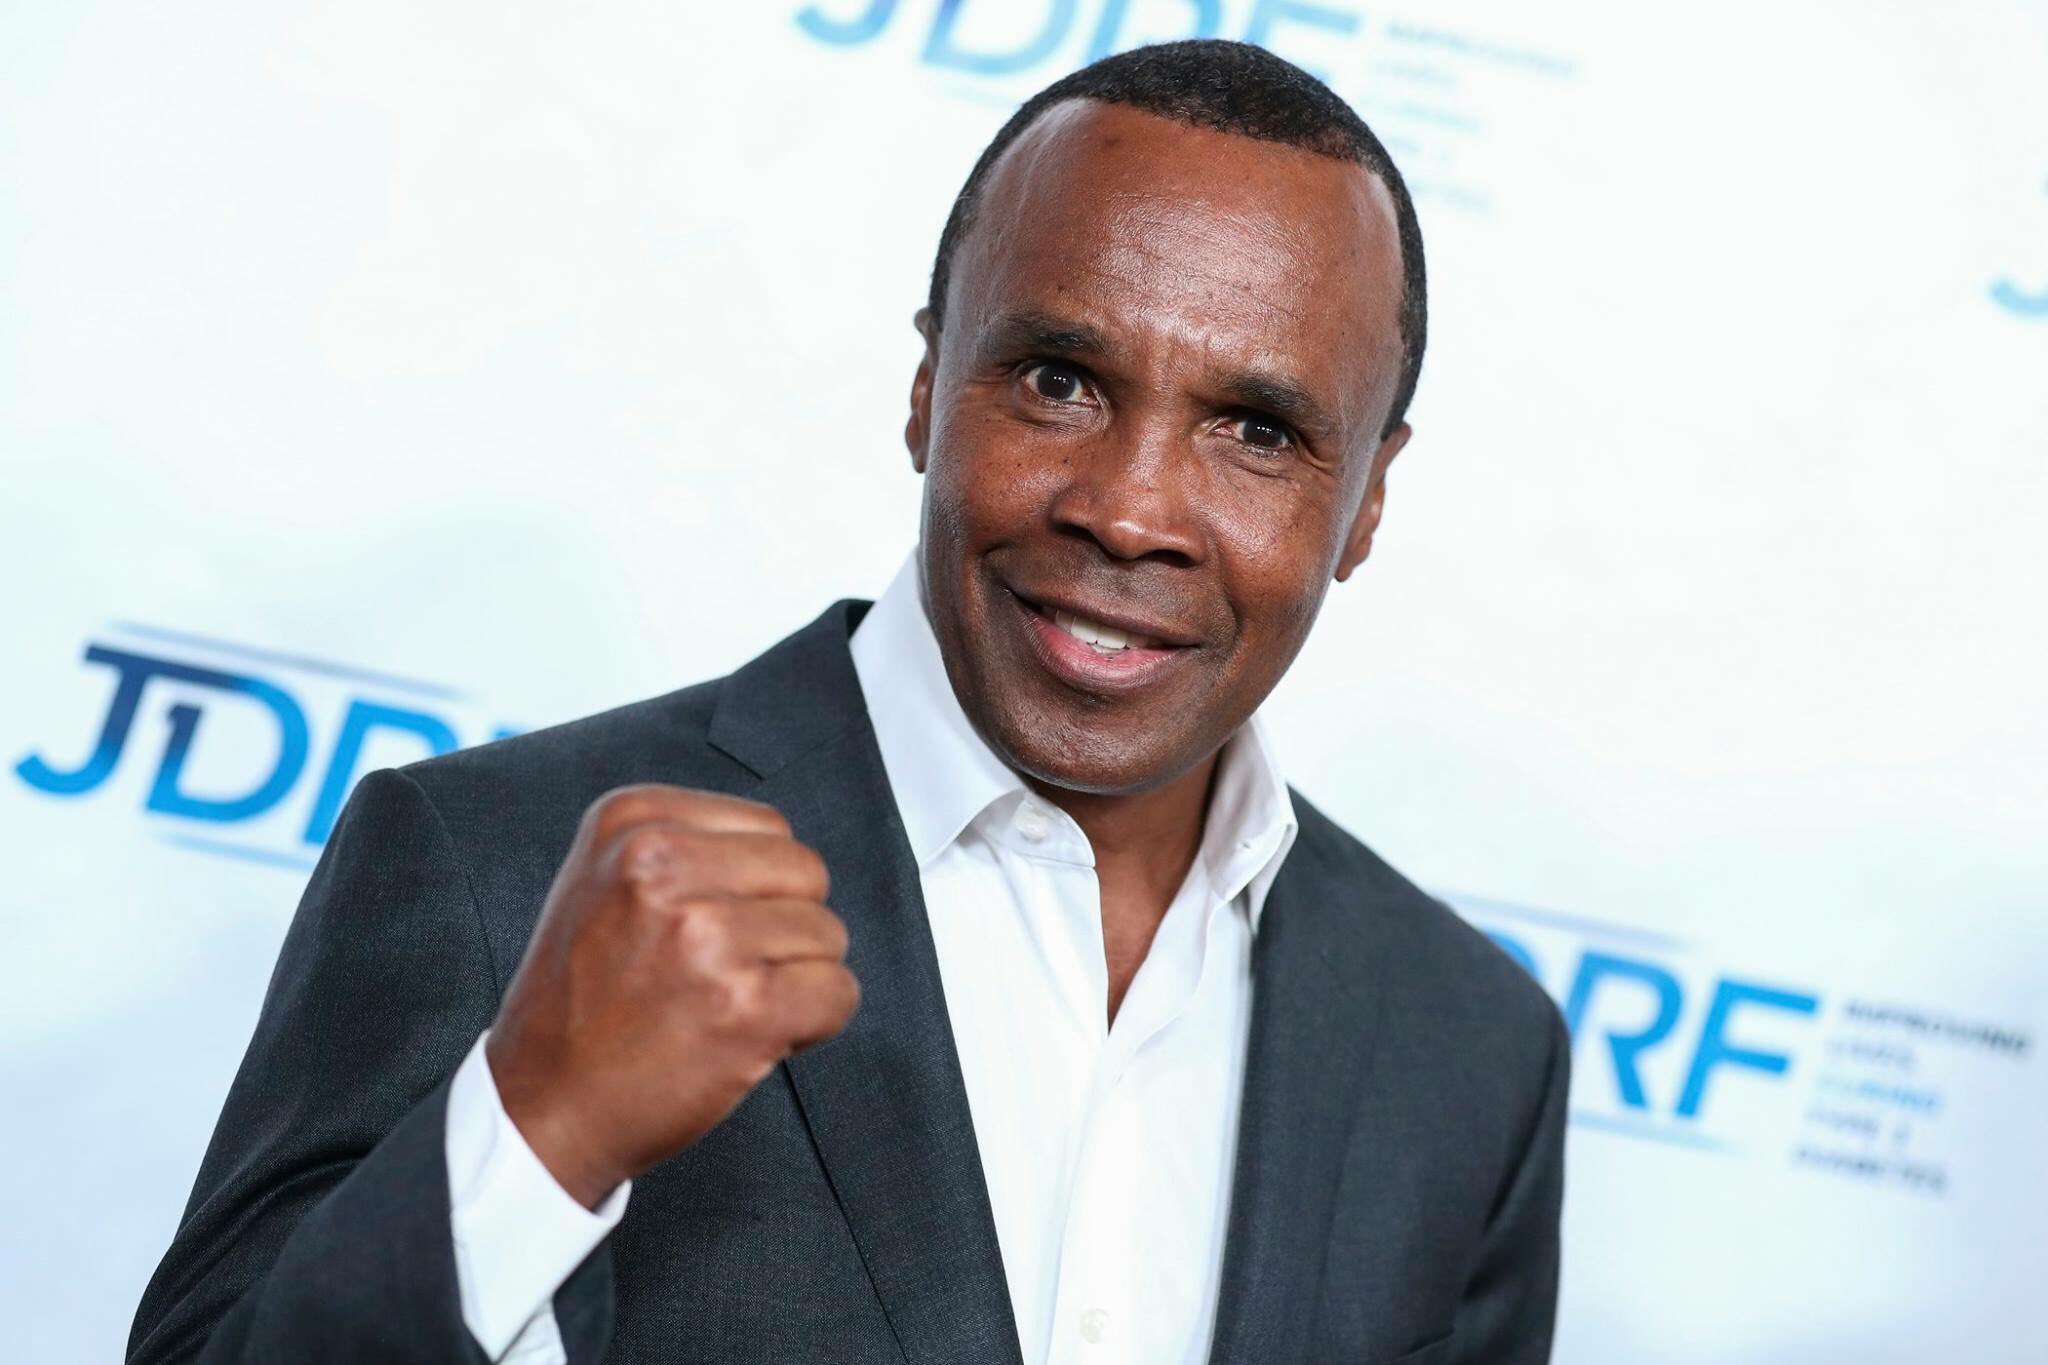 Happy Birthday to former professional boxer, motivational speaker and actor SUGAR RAY LEONARD,. He turns 61 today. 